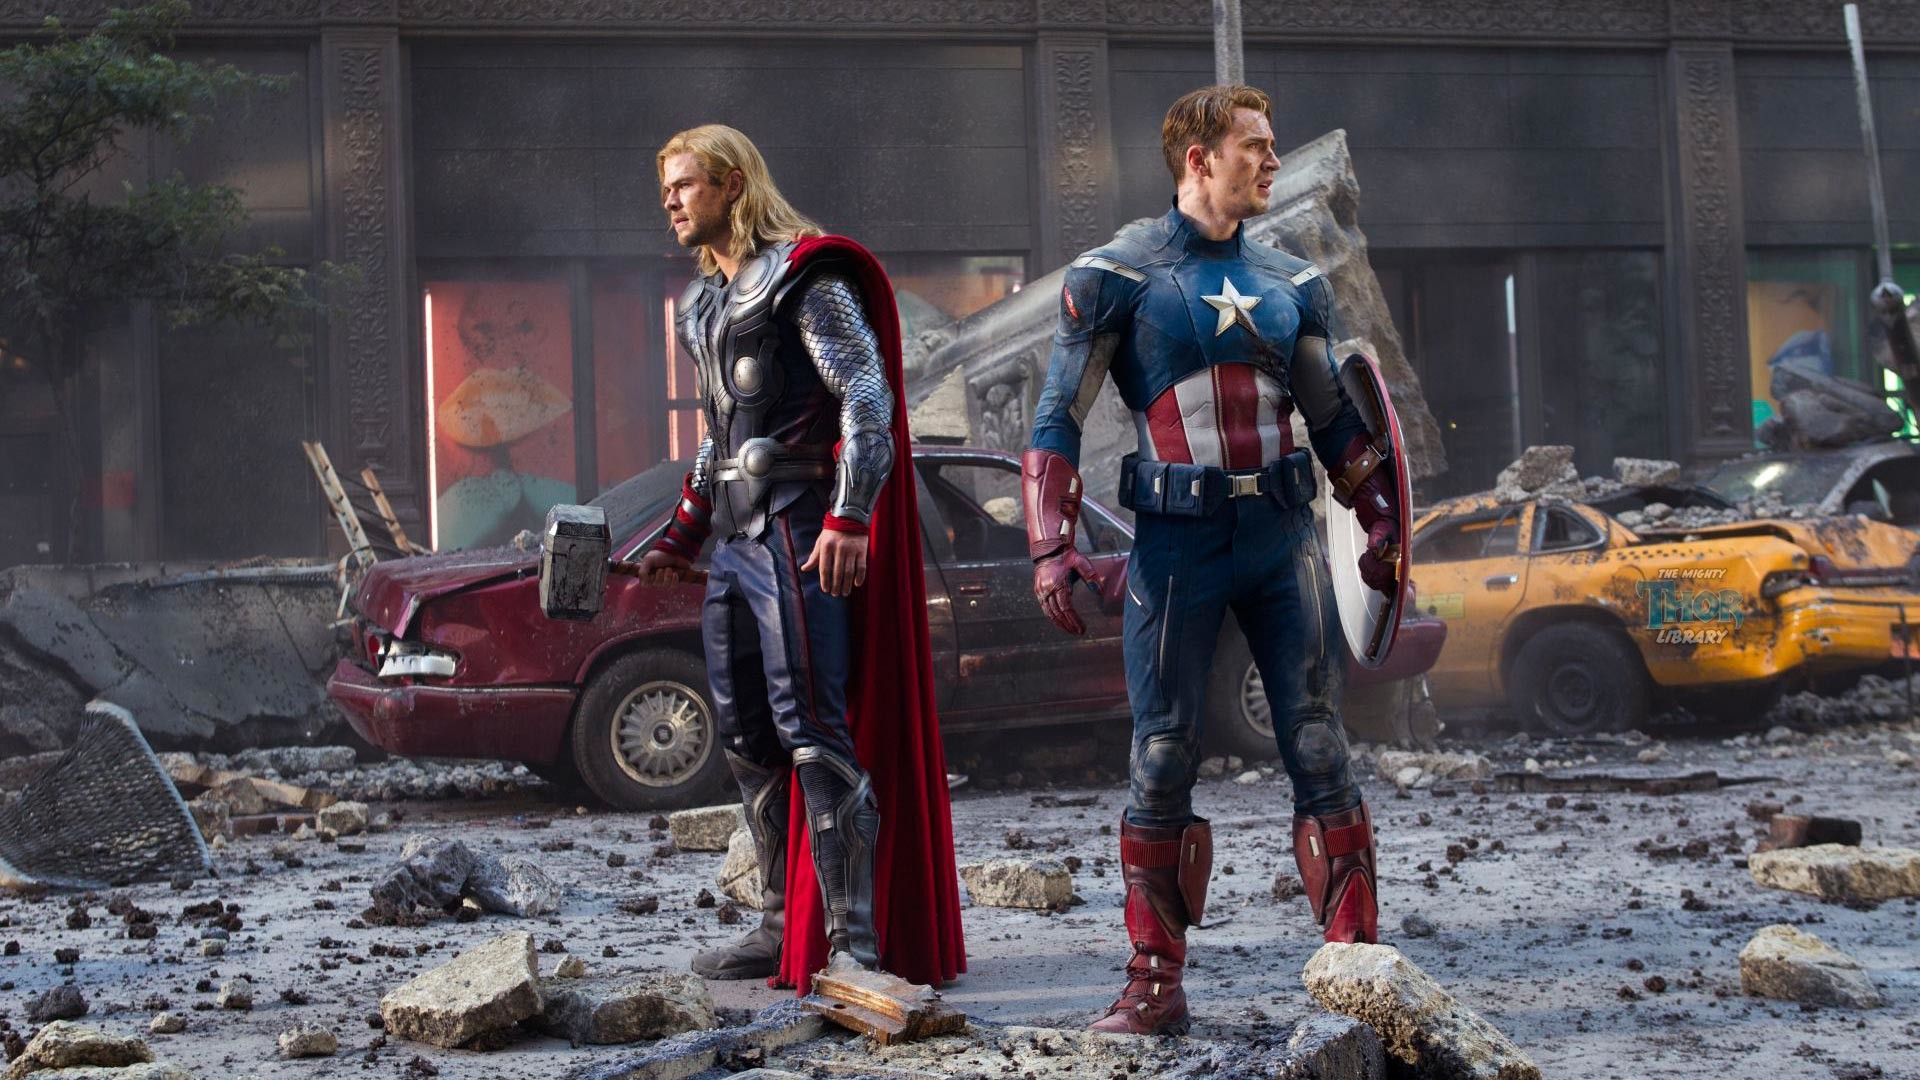 1920x1080 Thor and Captain America in Avengers Movie (1920 x 1080) wallpaper